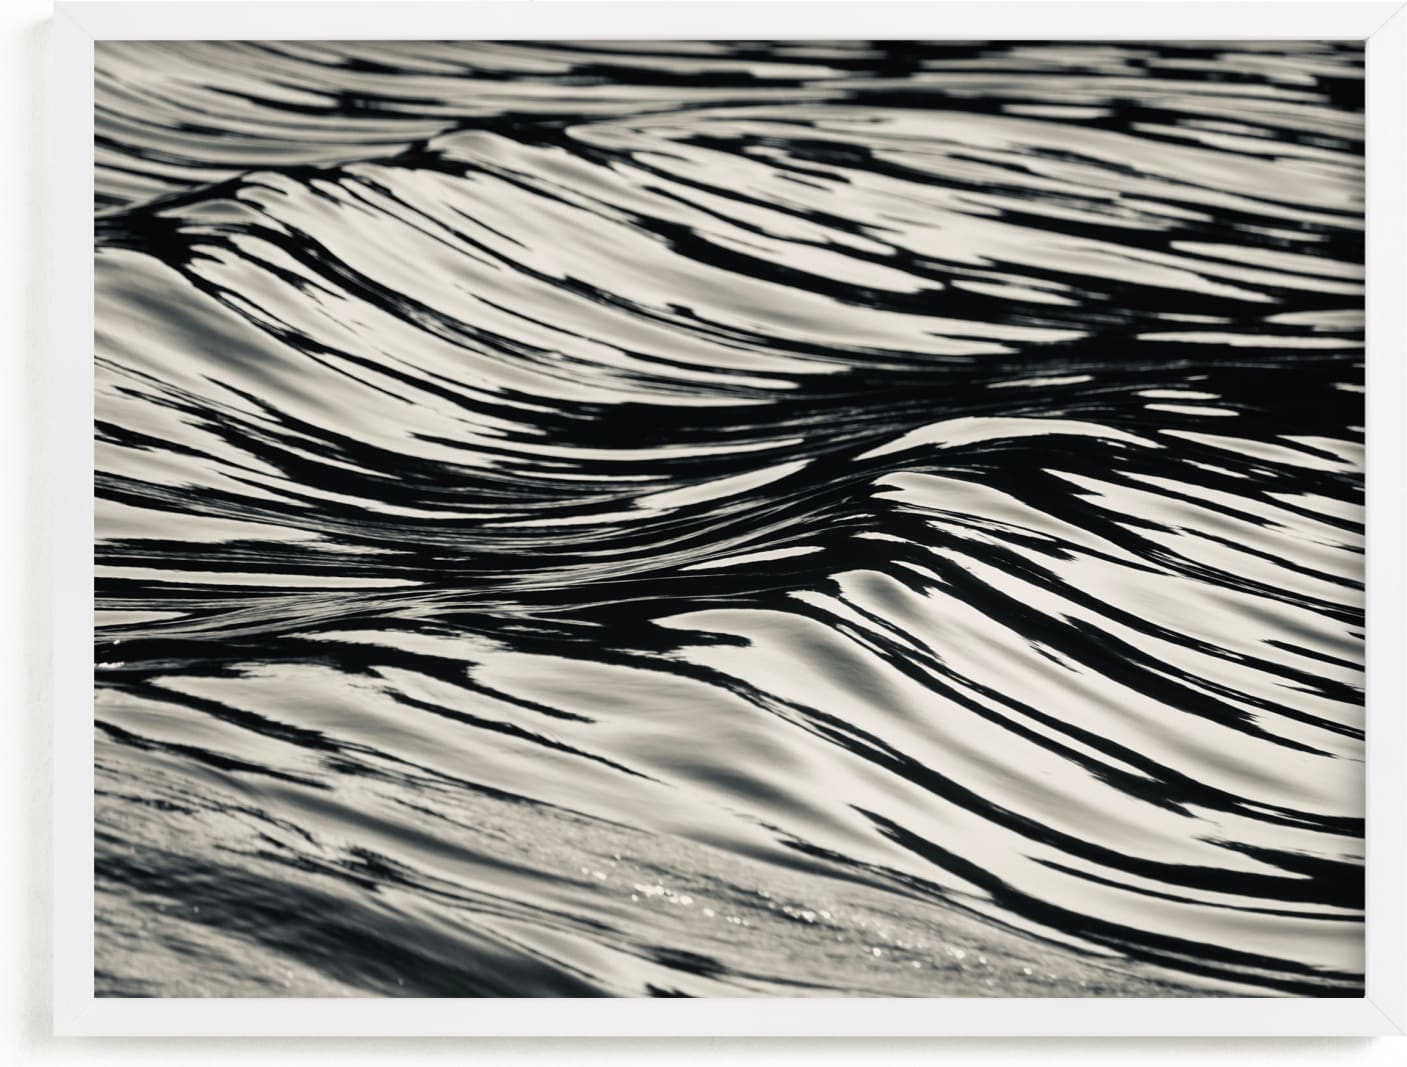 This is a black and white art by Jan Kessel called Wave Forms.